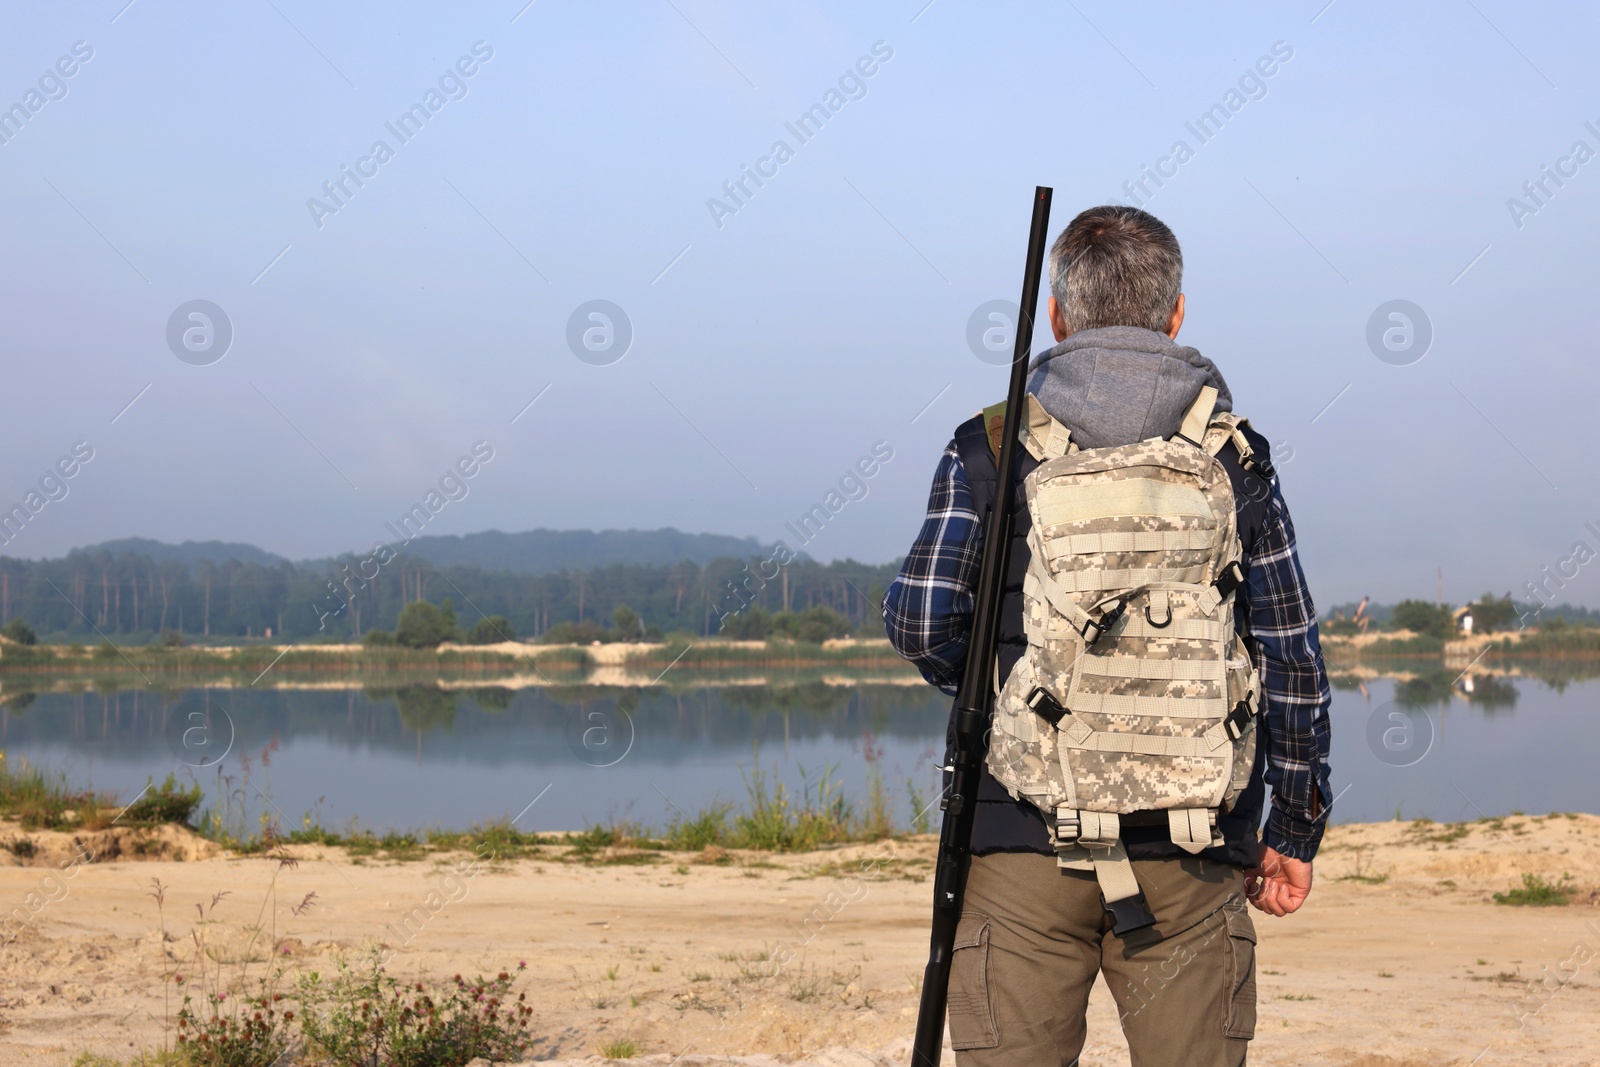 Photo of Man with hunting rifle and backpack near lake outdoors, back view. Space for text